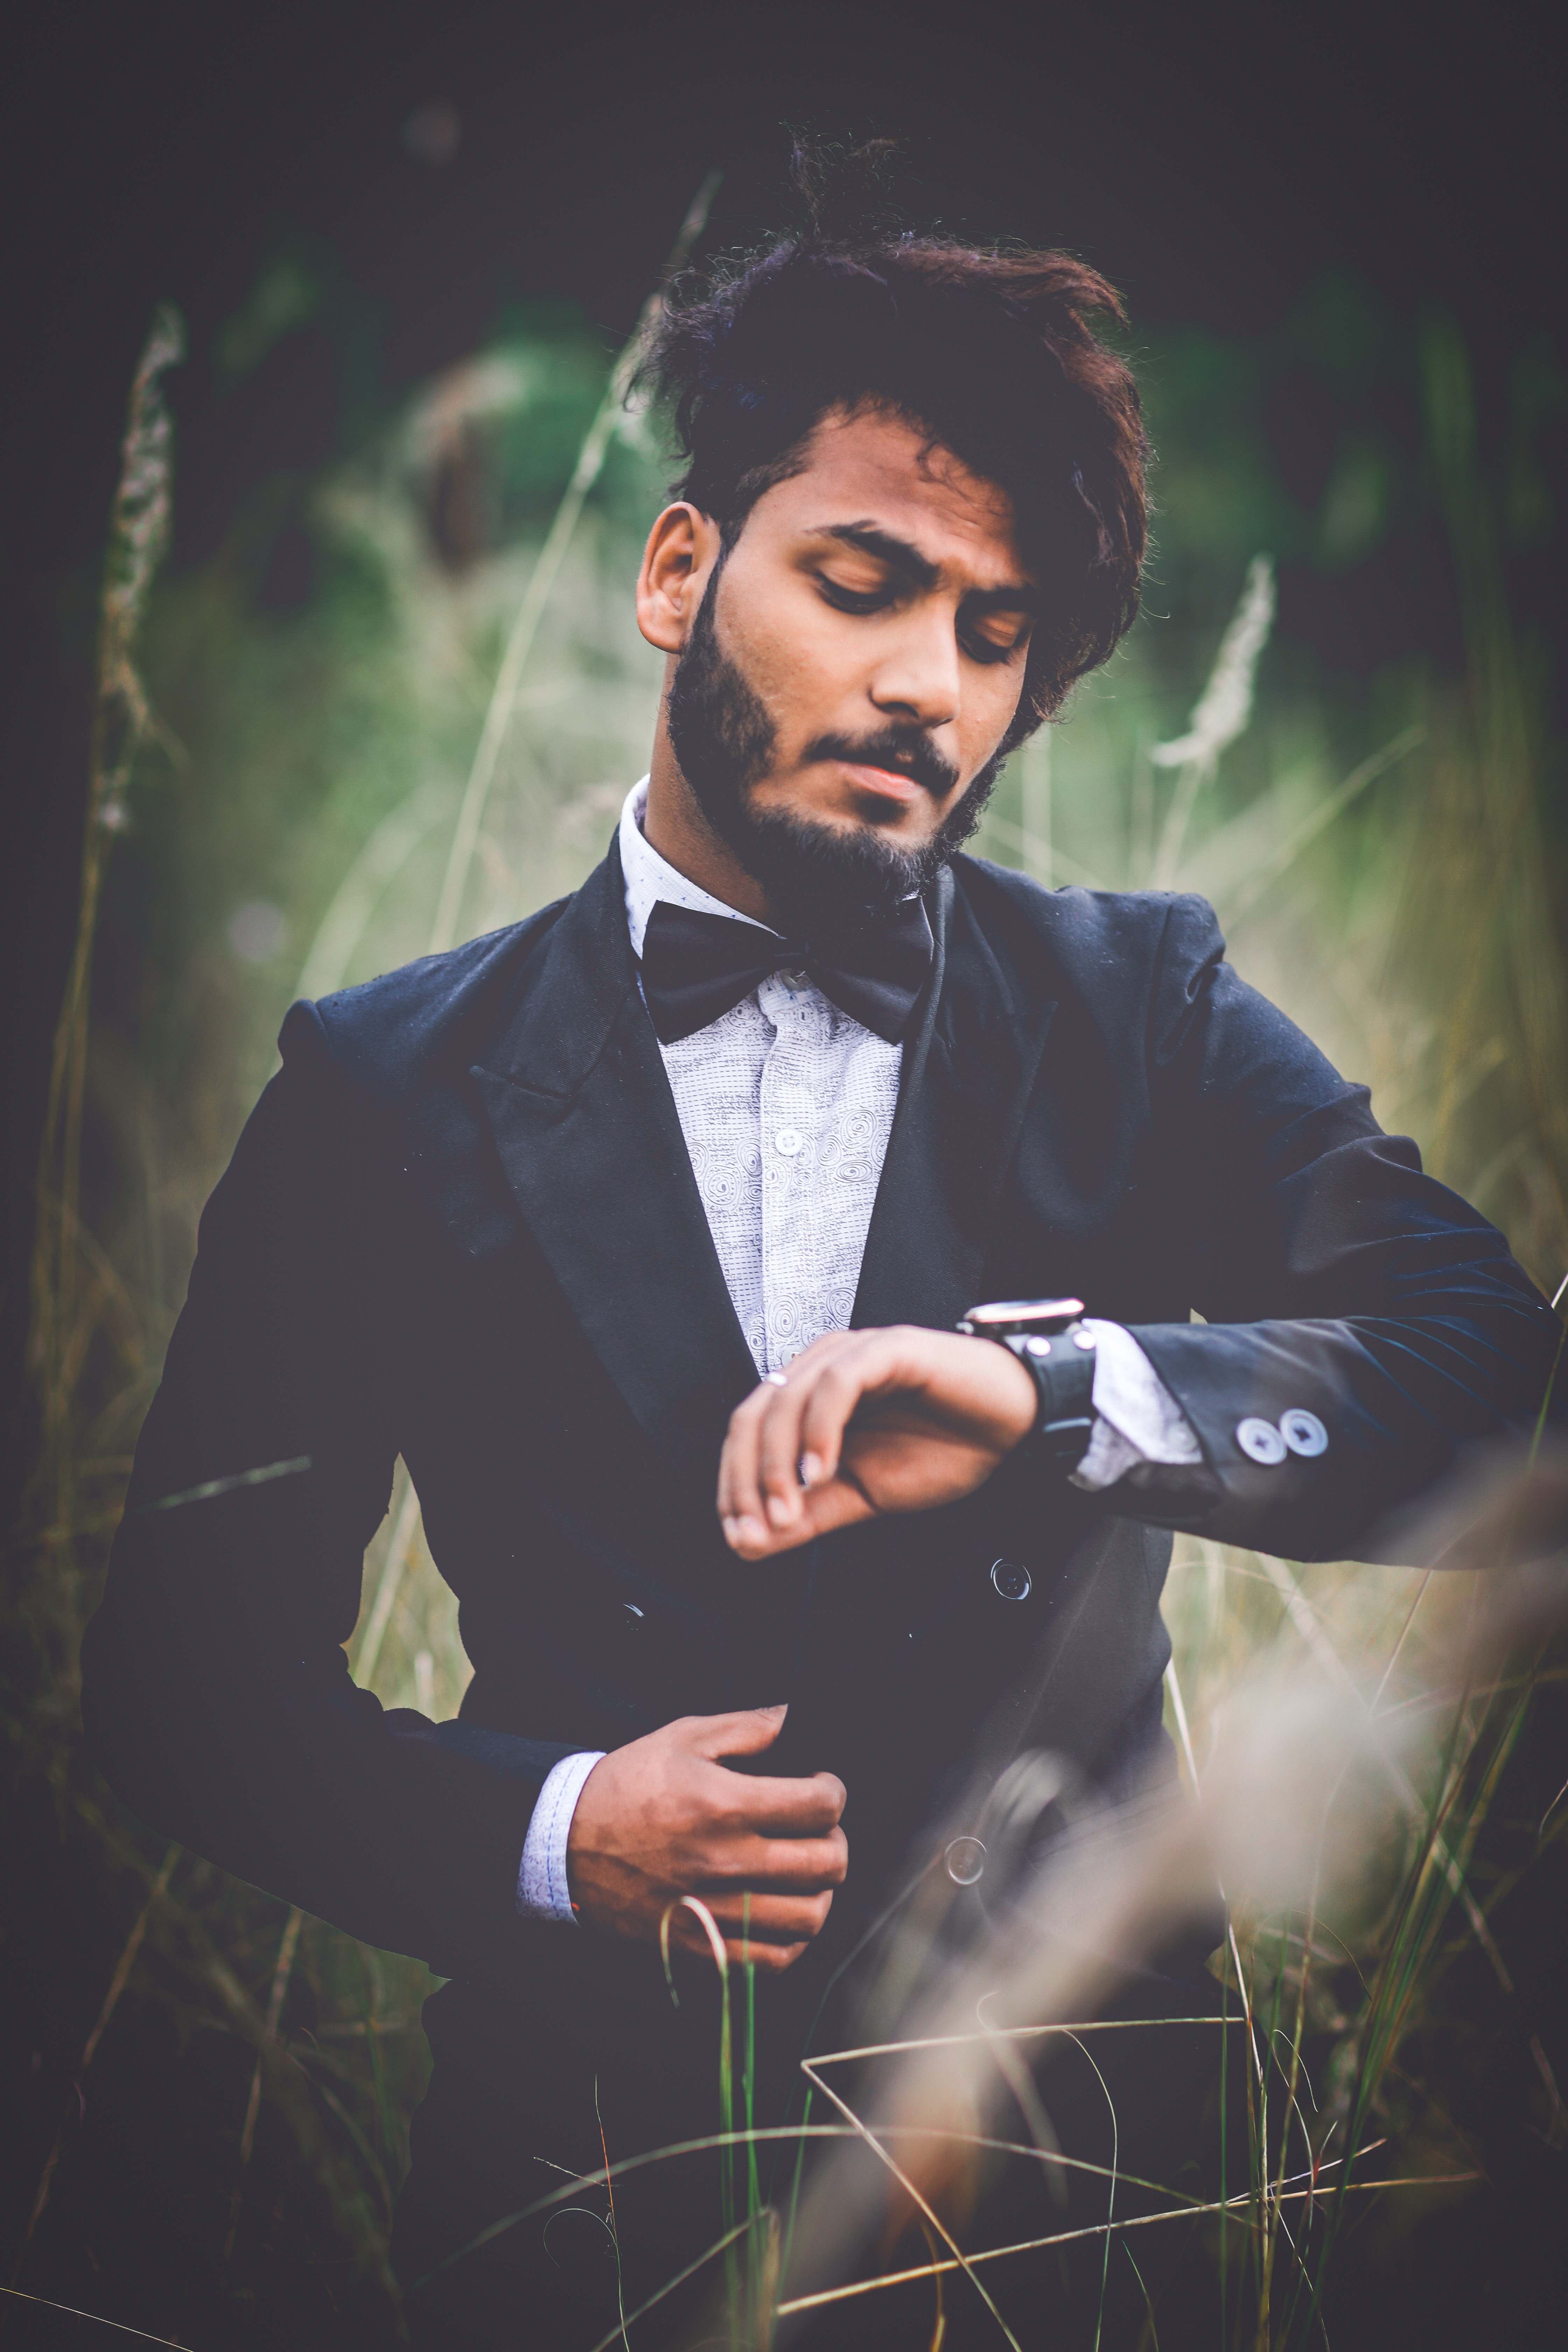 Man in tuxedo suit surrounded by grass photo